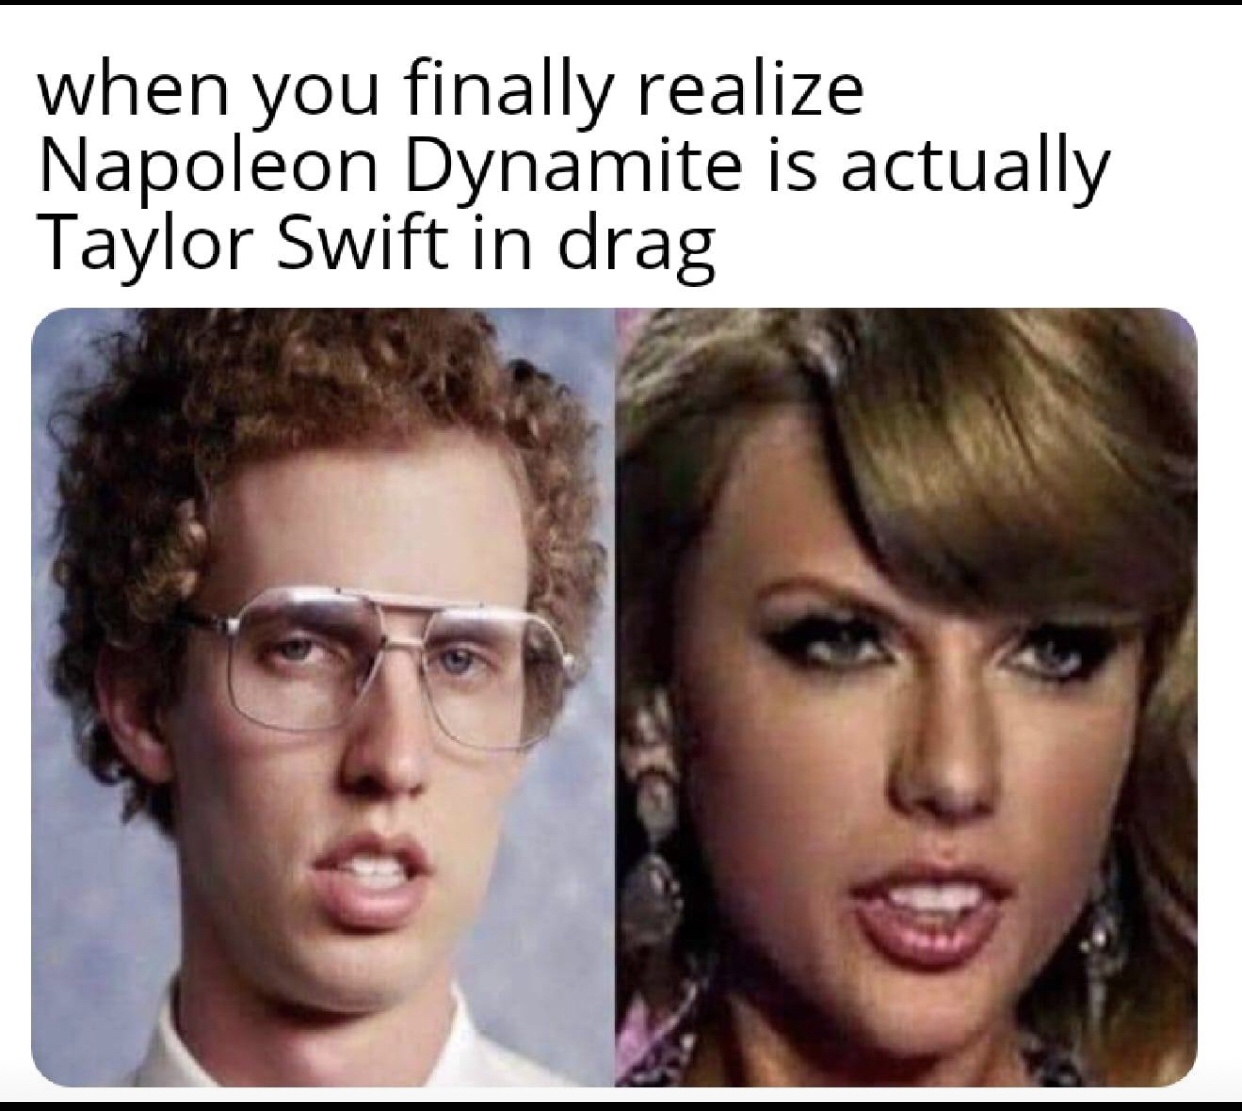 napoleon dynamite and taylor swift meme - when you finally realize Napoleon Dynamite is actually Taylor Swift in drag